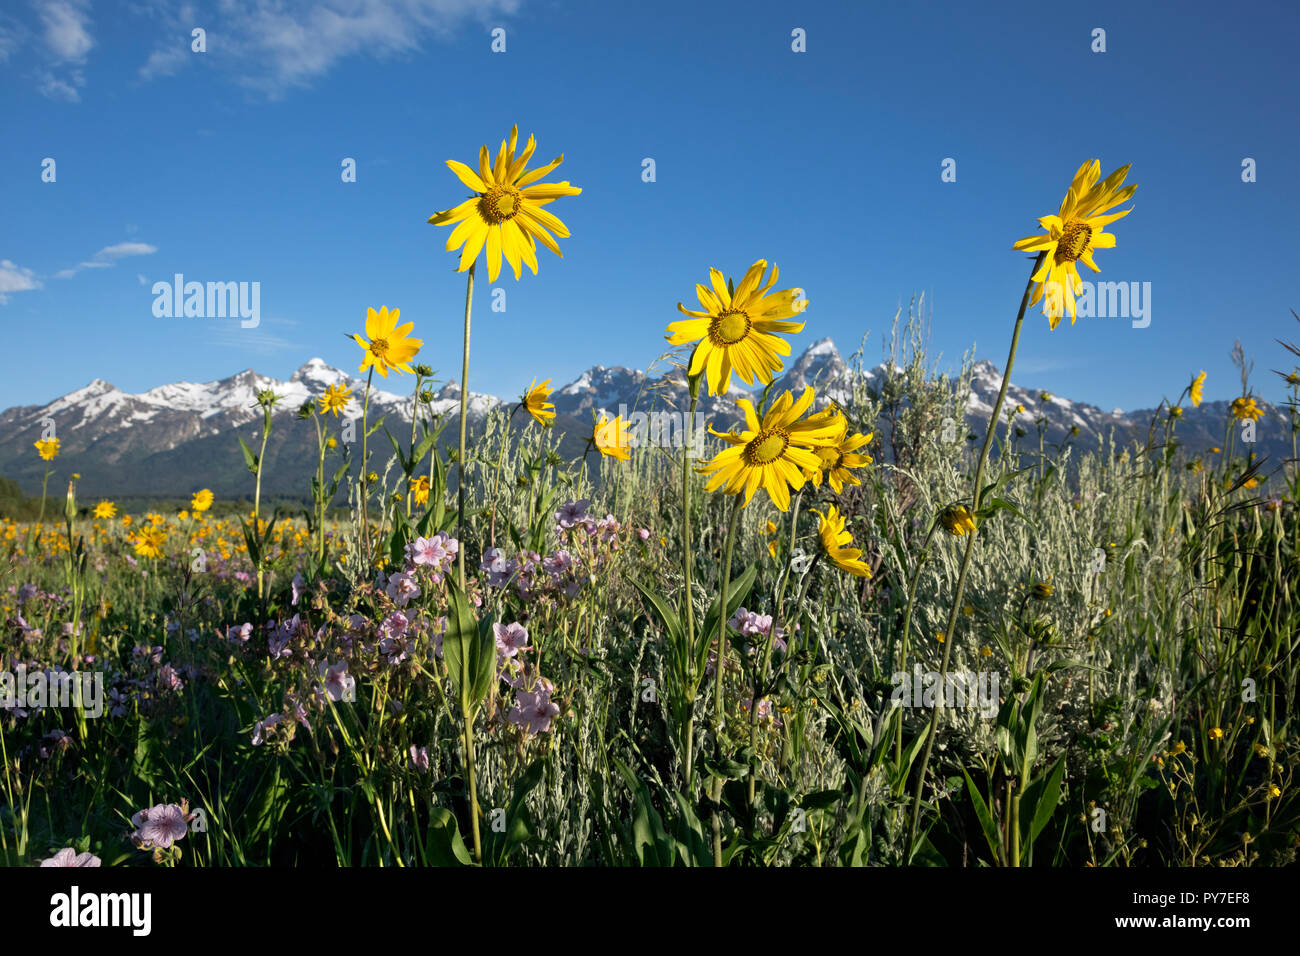 WY02524-00...WYOMING - Arrowleaf balsamroot and sticky geranium blooming in the Antelope Flats area of Jackson Hole in Grand Teton National Park. Stock Photo